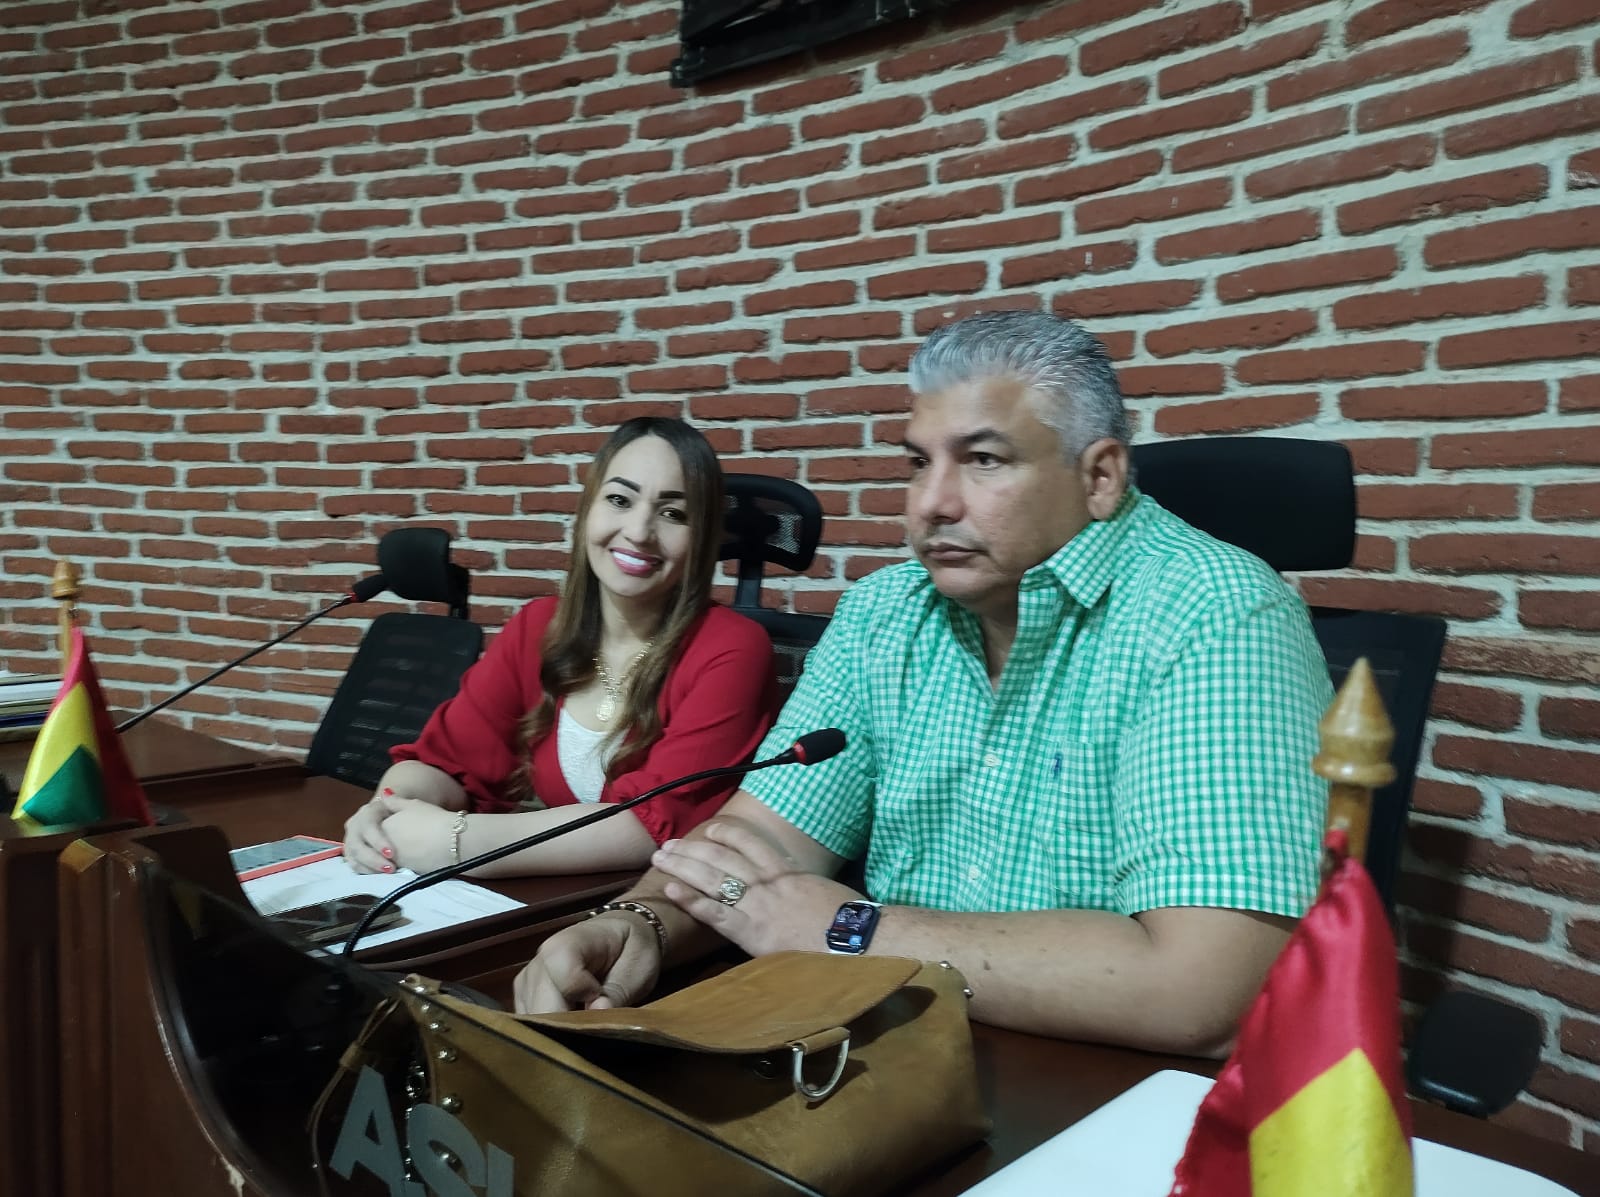 President of the Cartagena council captured with drugs was released and returned to office